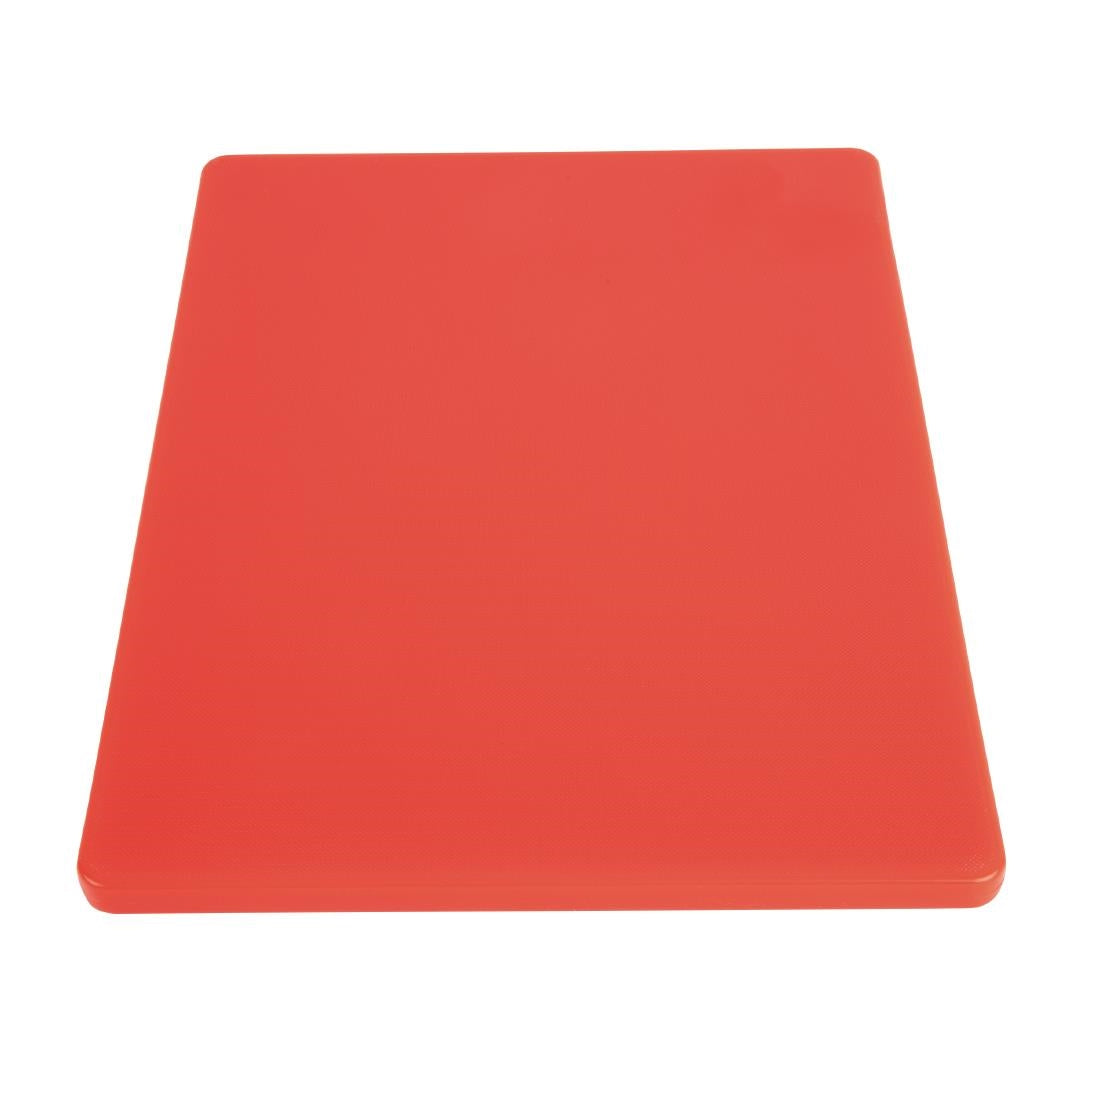 GH794 Hygiplas Low Density Red Chopping Board Small JD Catering Equipment Solutions Ltd